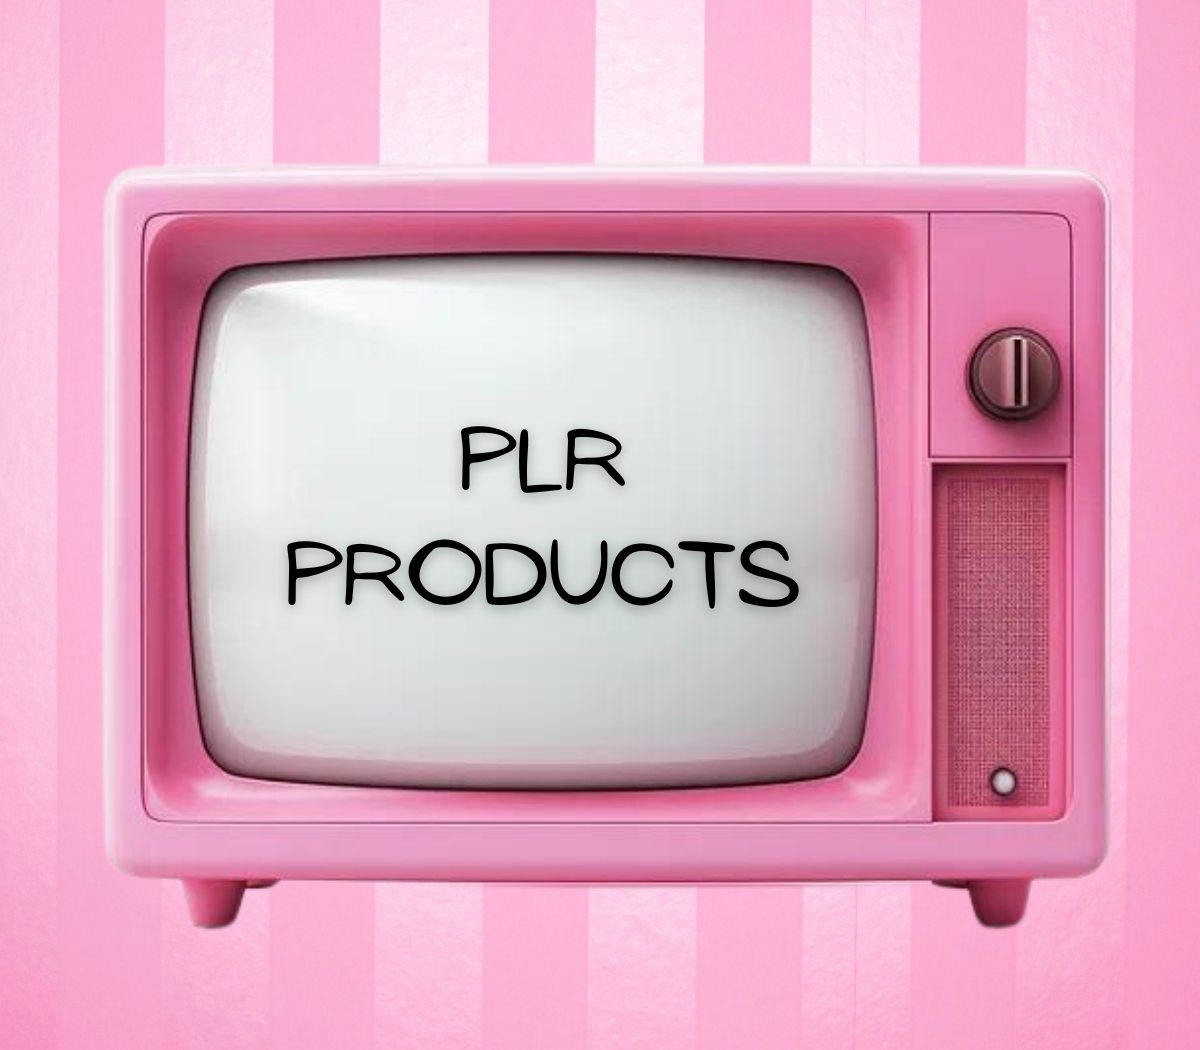 PLR PRODUCTS